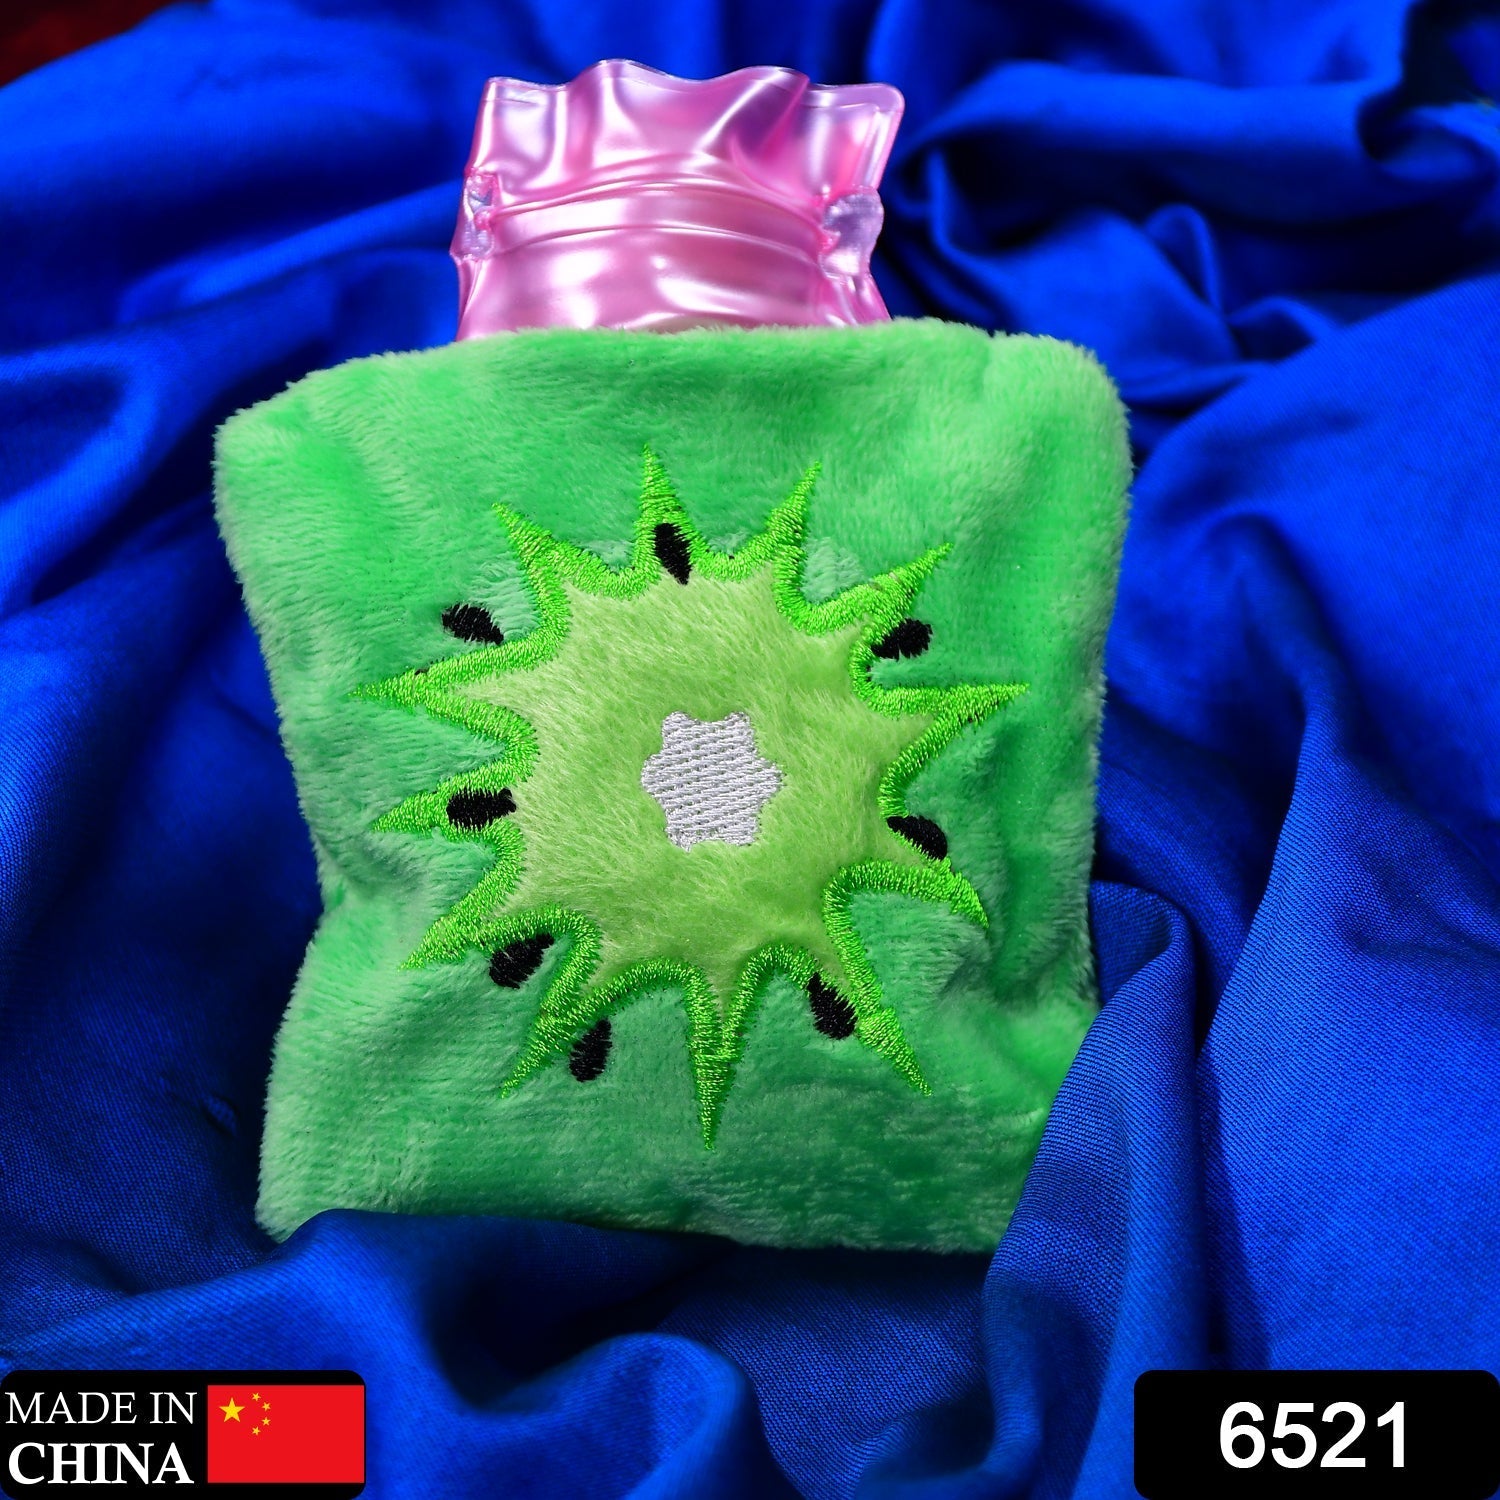 6521 Green sun small Hot Water Bag with Cover for Pain Relief, Neck, Shoulder Pain and Hand, Feet Warmer, Menstrual Cramps. DeoDap